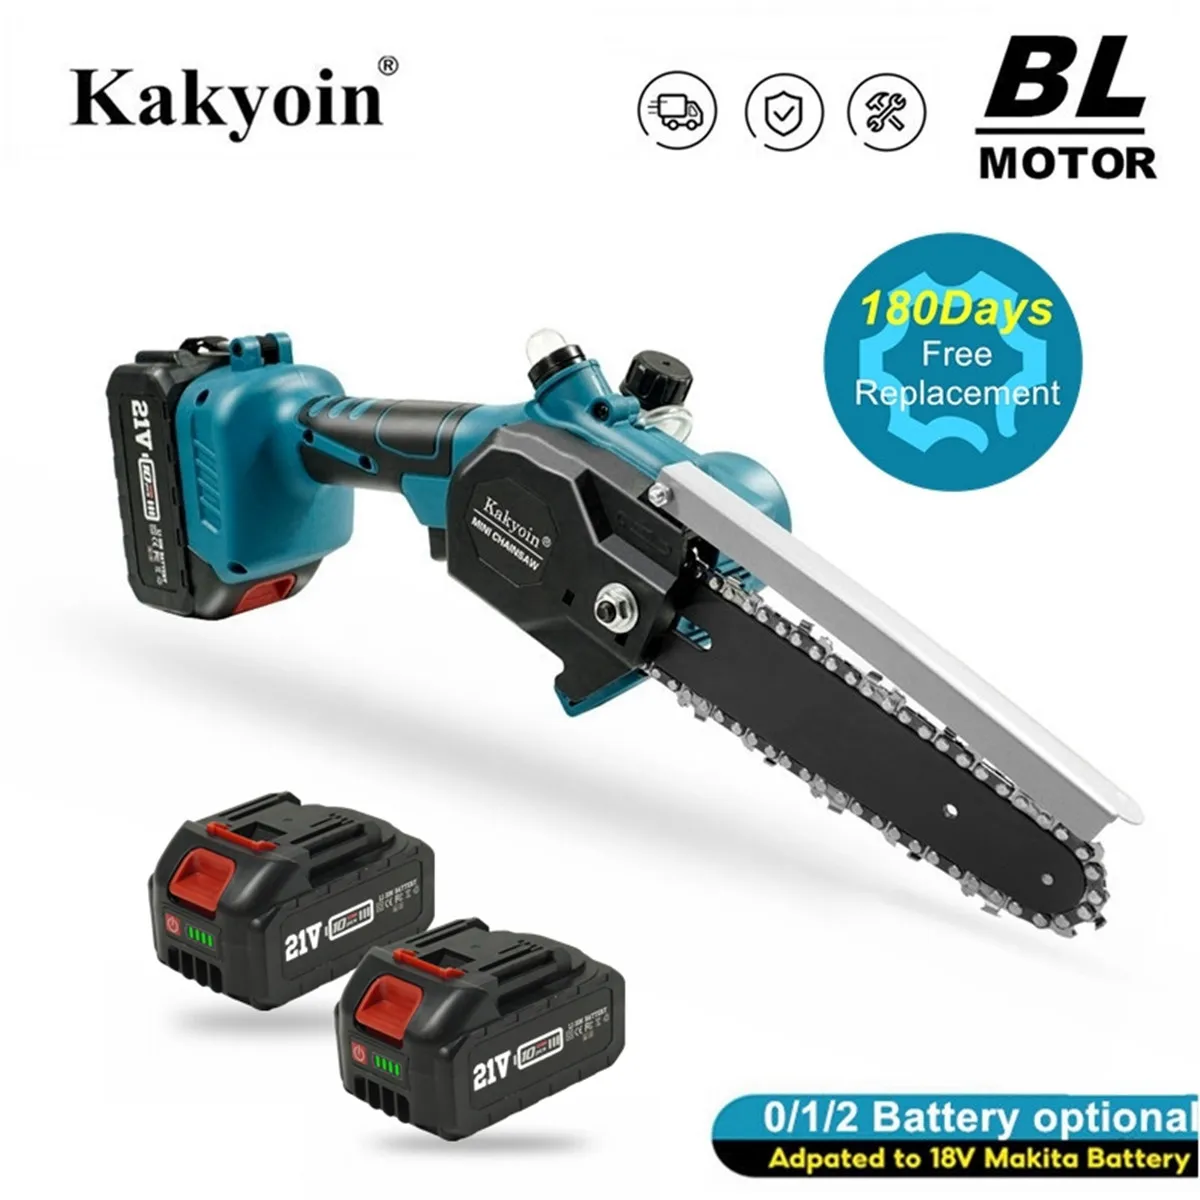 

6 Inch 1200W Brushless Mini Chain Saw Cordless Handheld Pruning Saw with Oil Can Woodworking Electric Saw Cutting Tool Garden